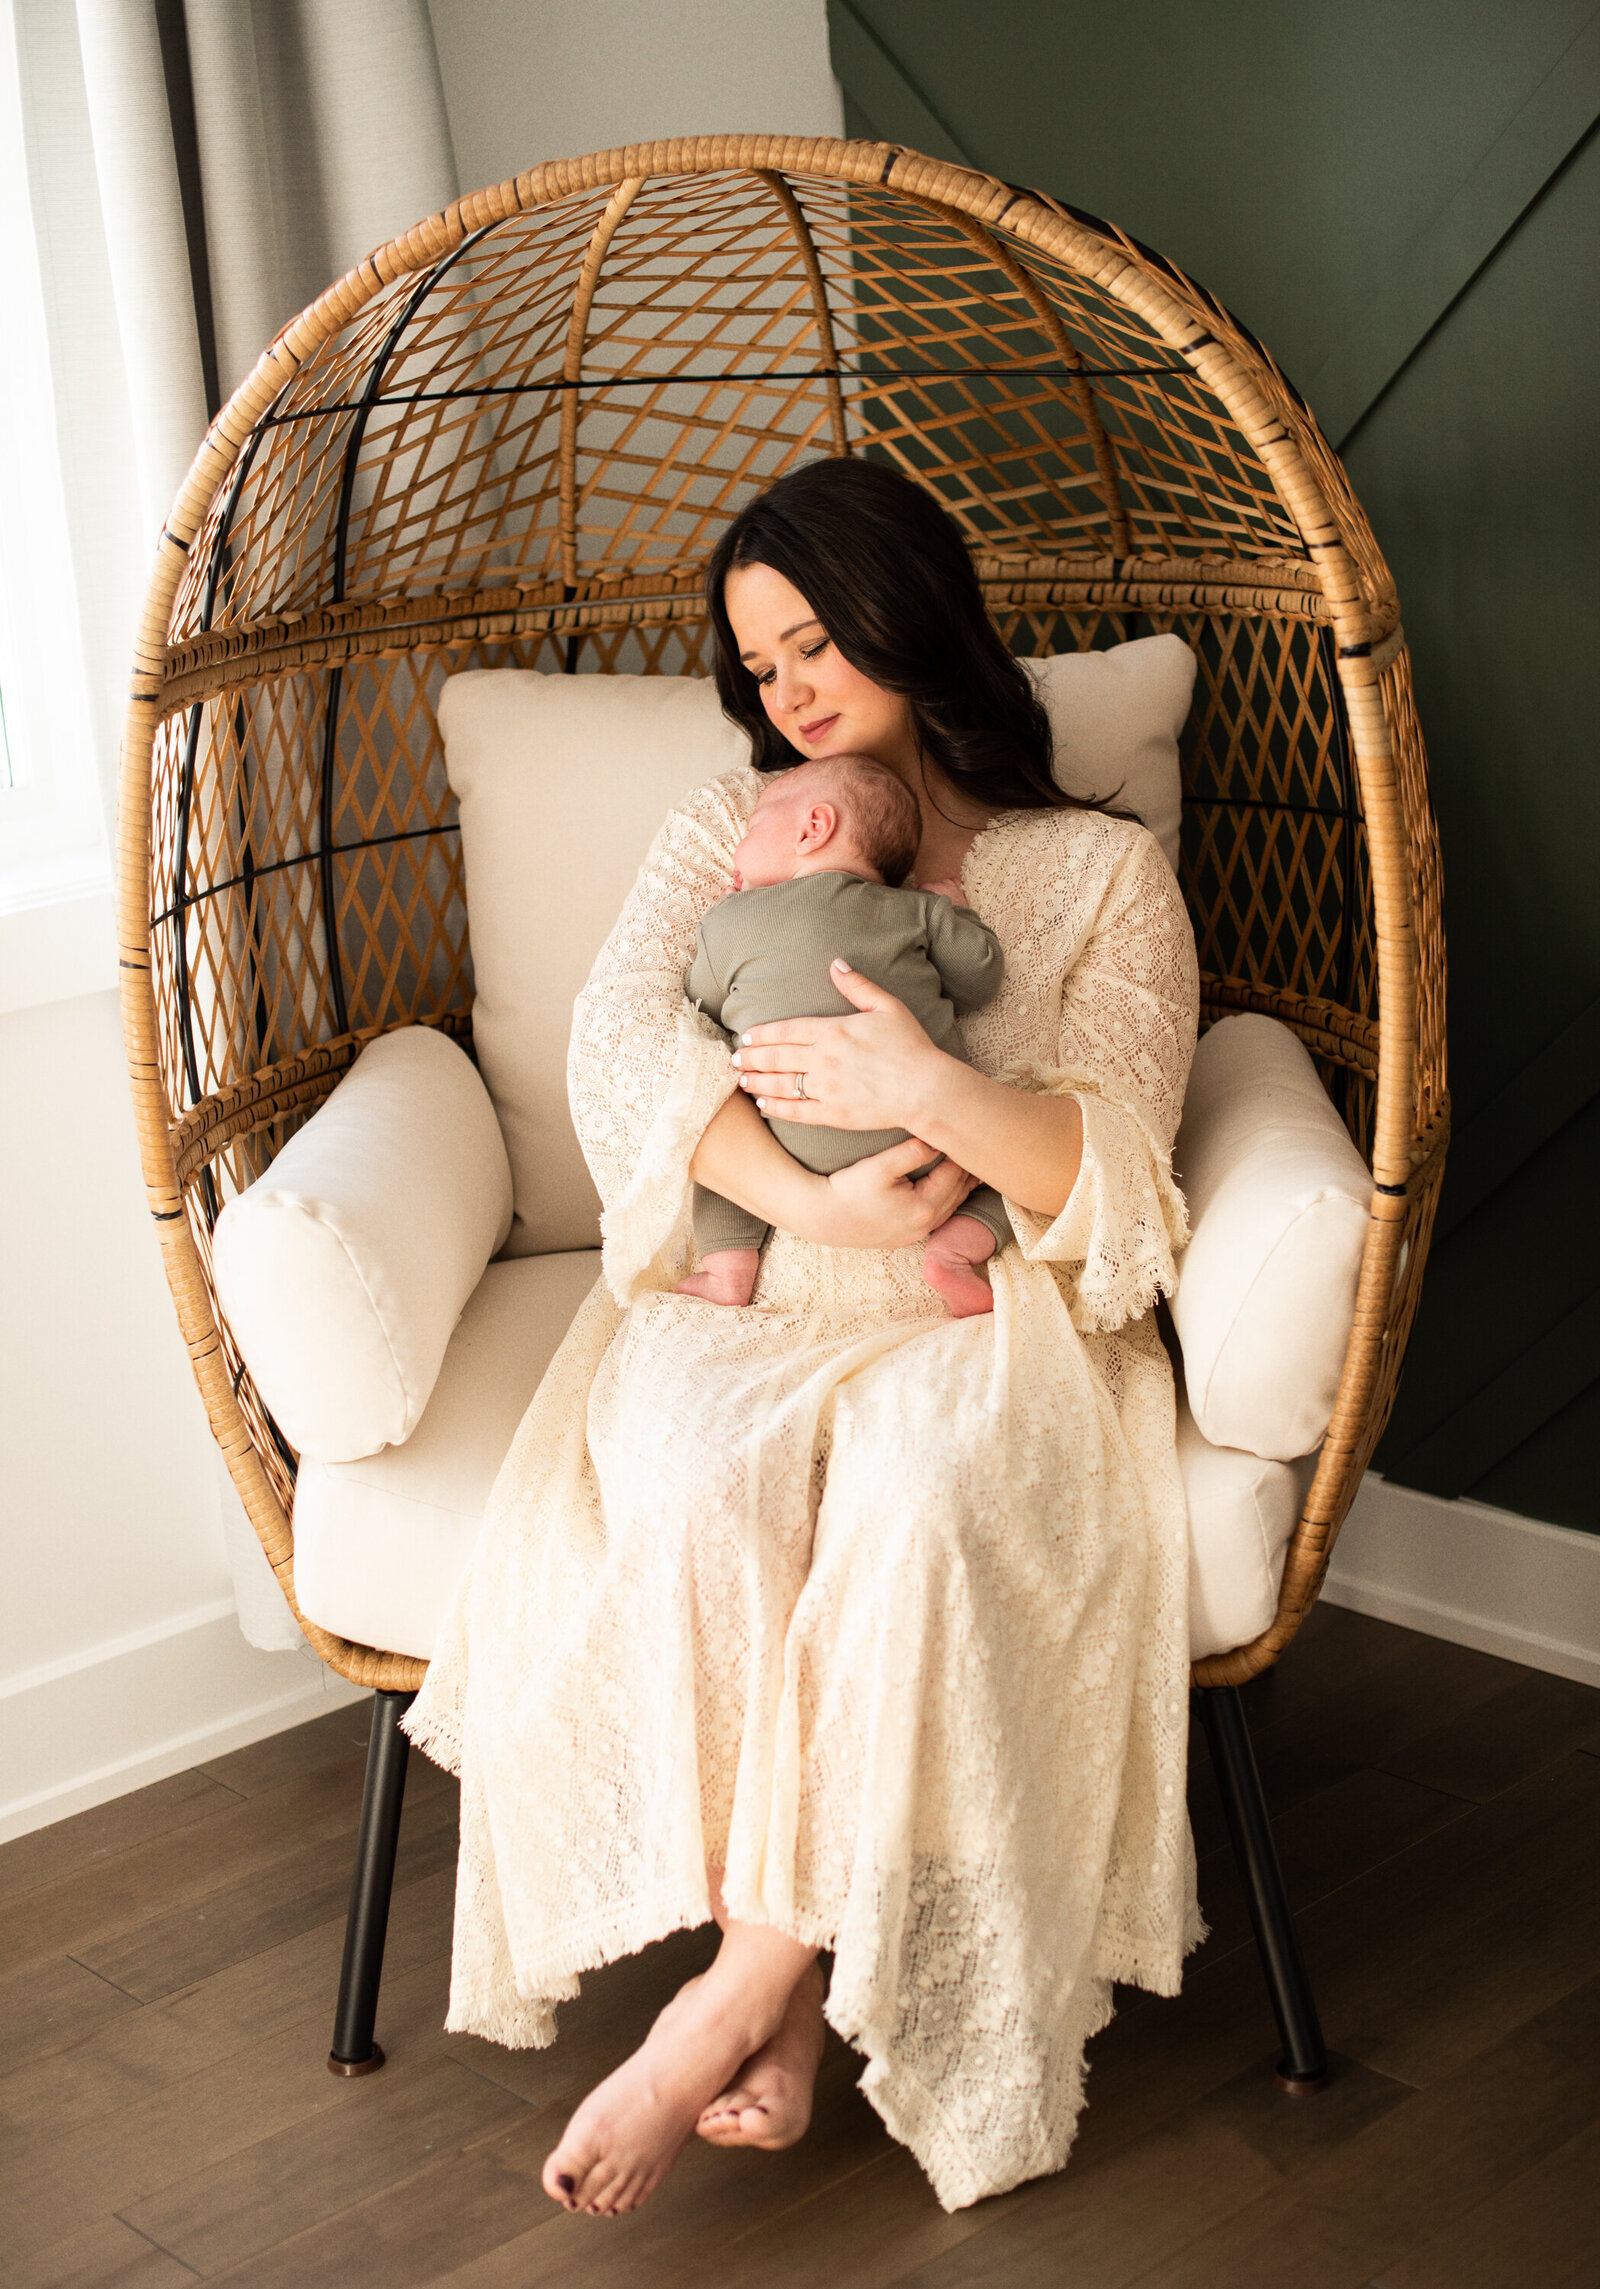 Mom holding her newborn baby in an egg chair.